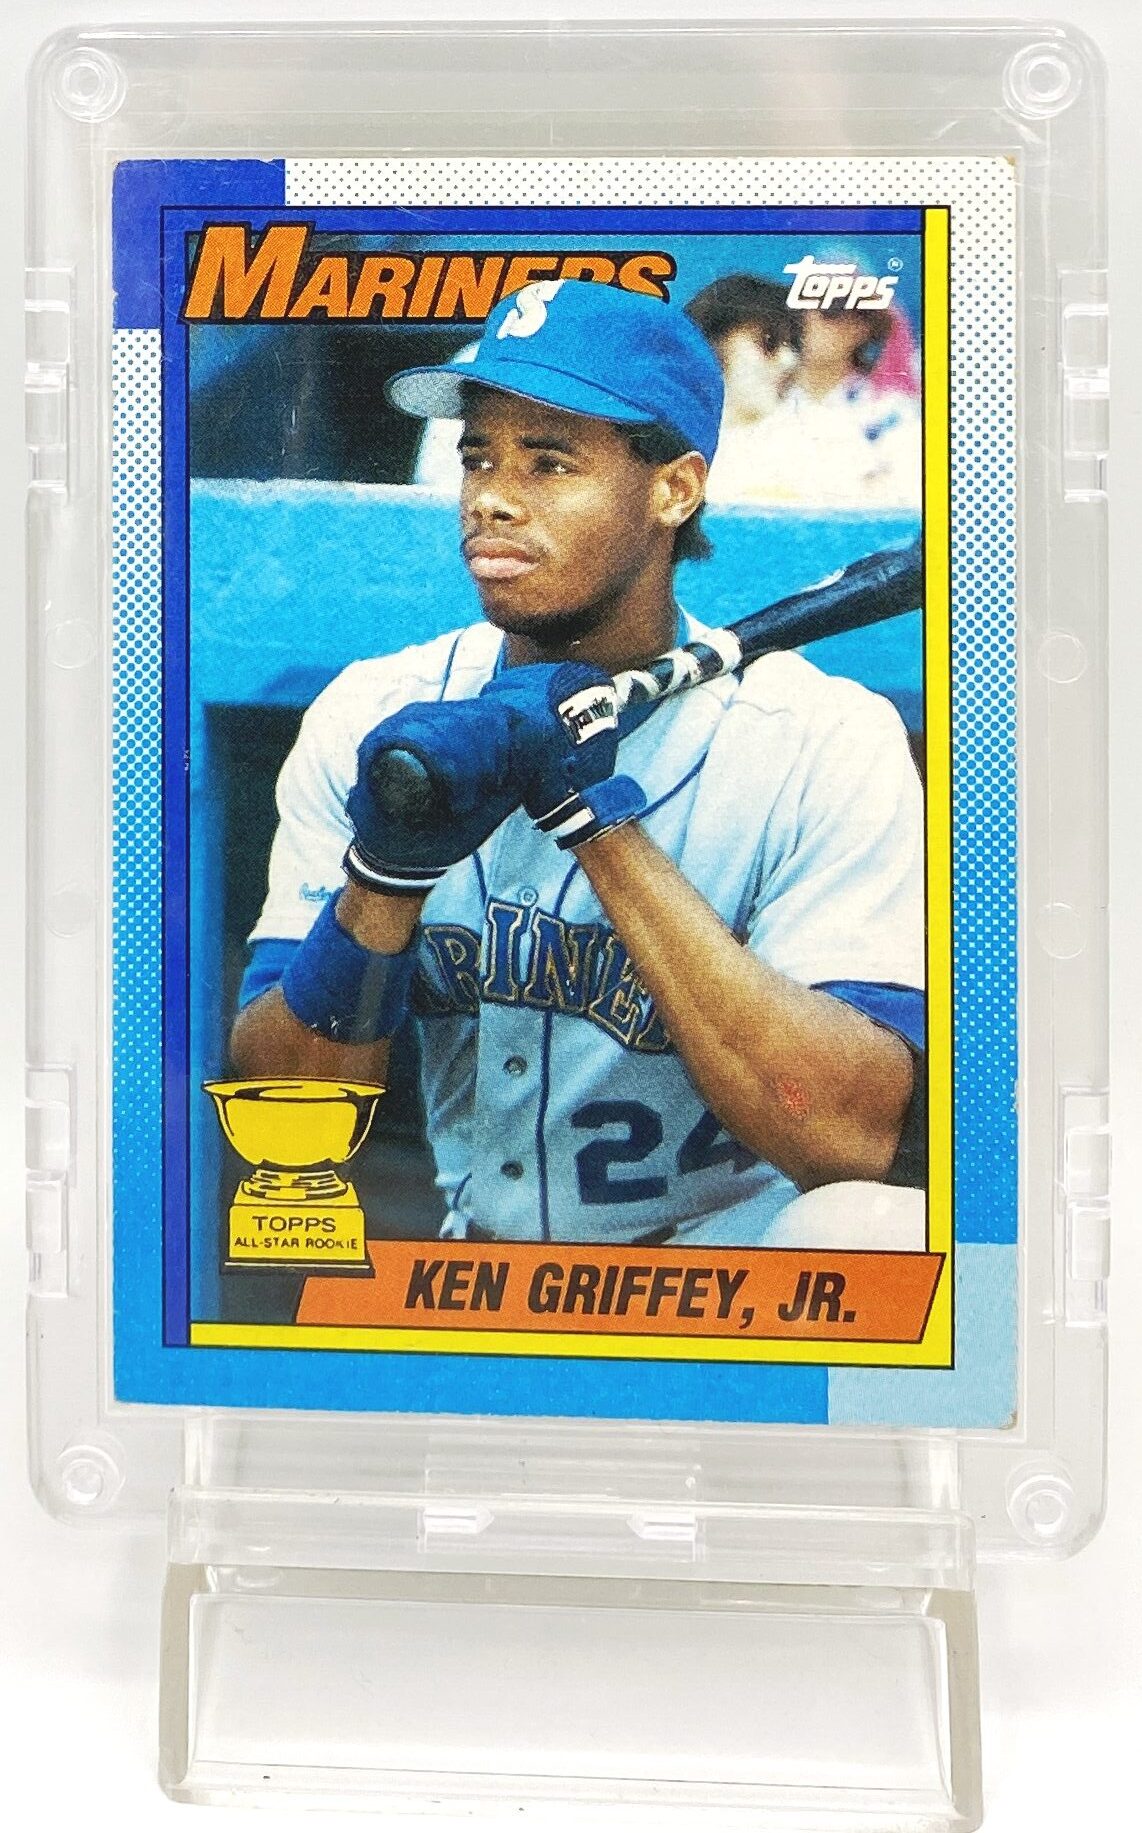 50 Different Griffey Cards No Duplicates Lot of 50 Ken Griffey Jr Seattle Mariners Vintage 1990's Baseball Cards